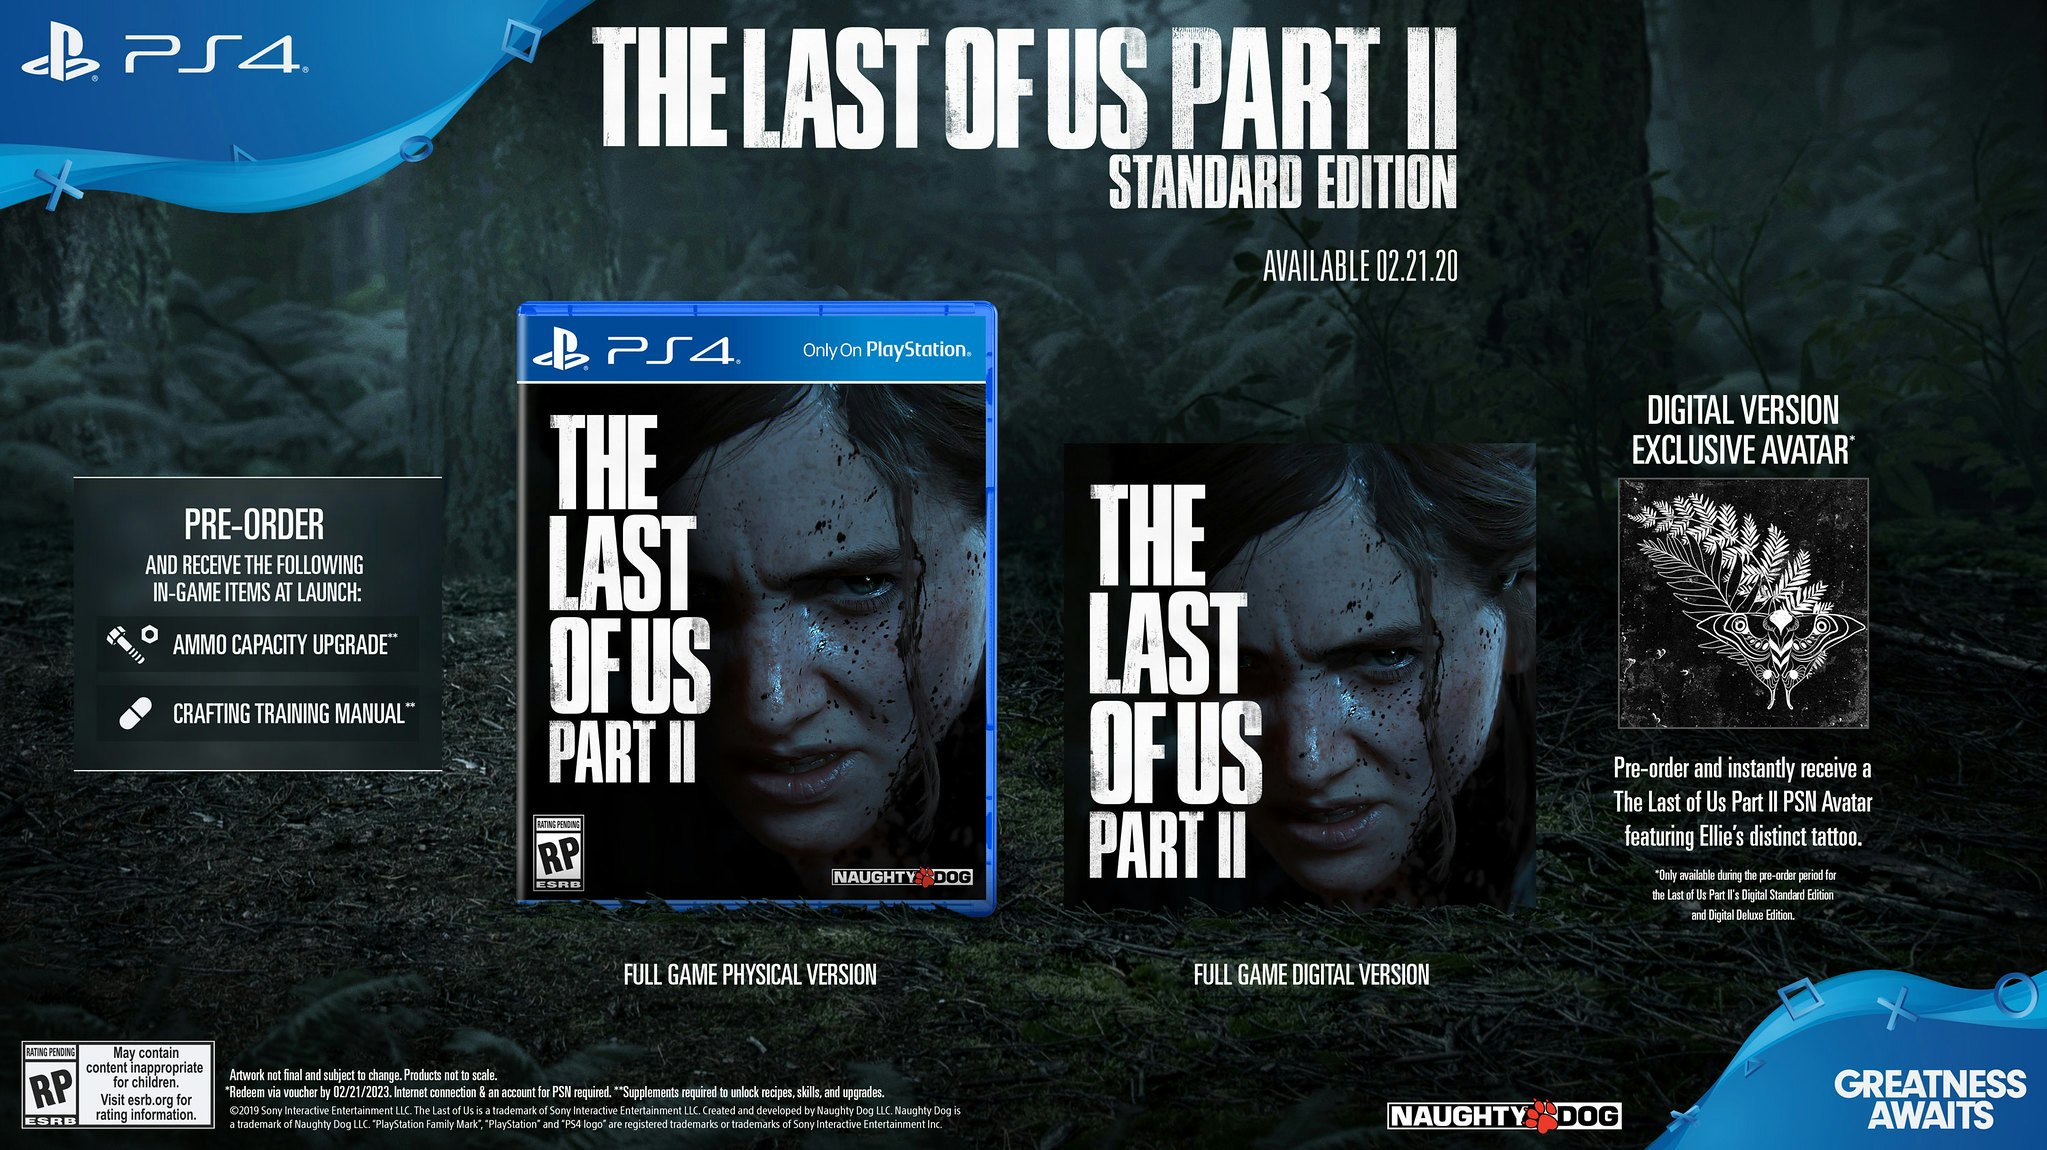 ps4 collector the last of us 2